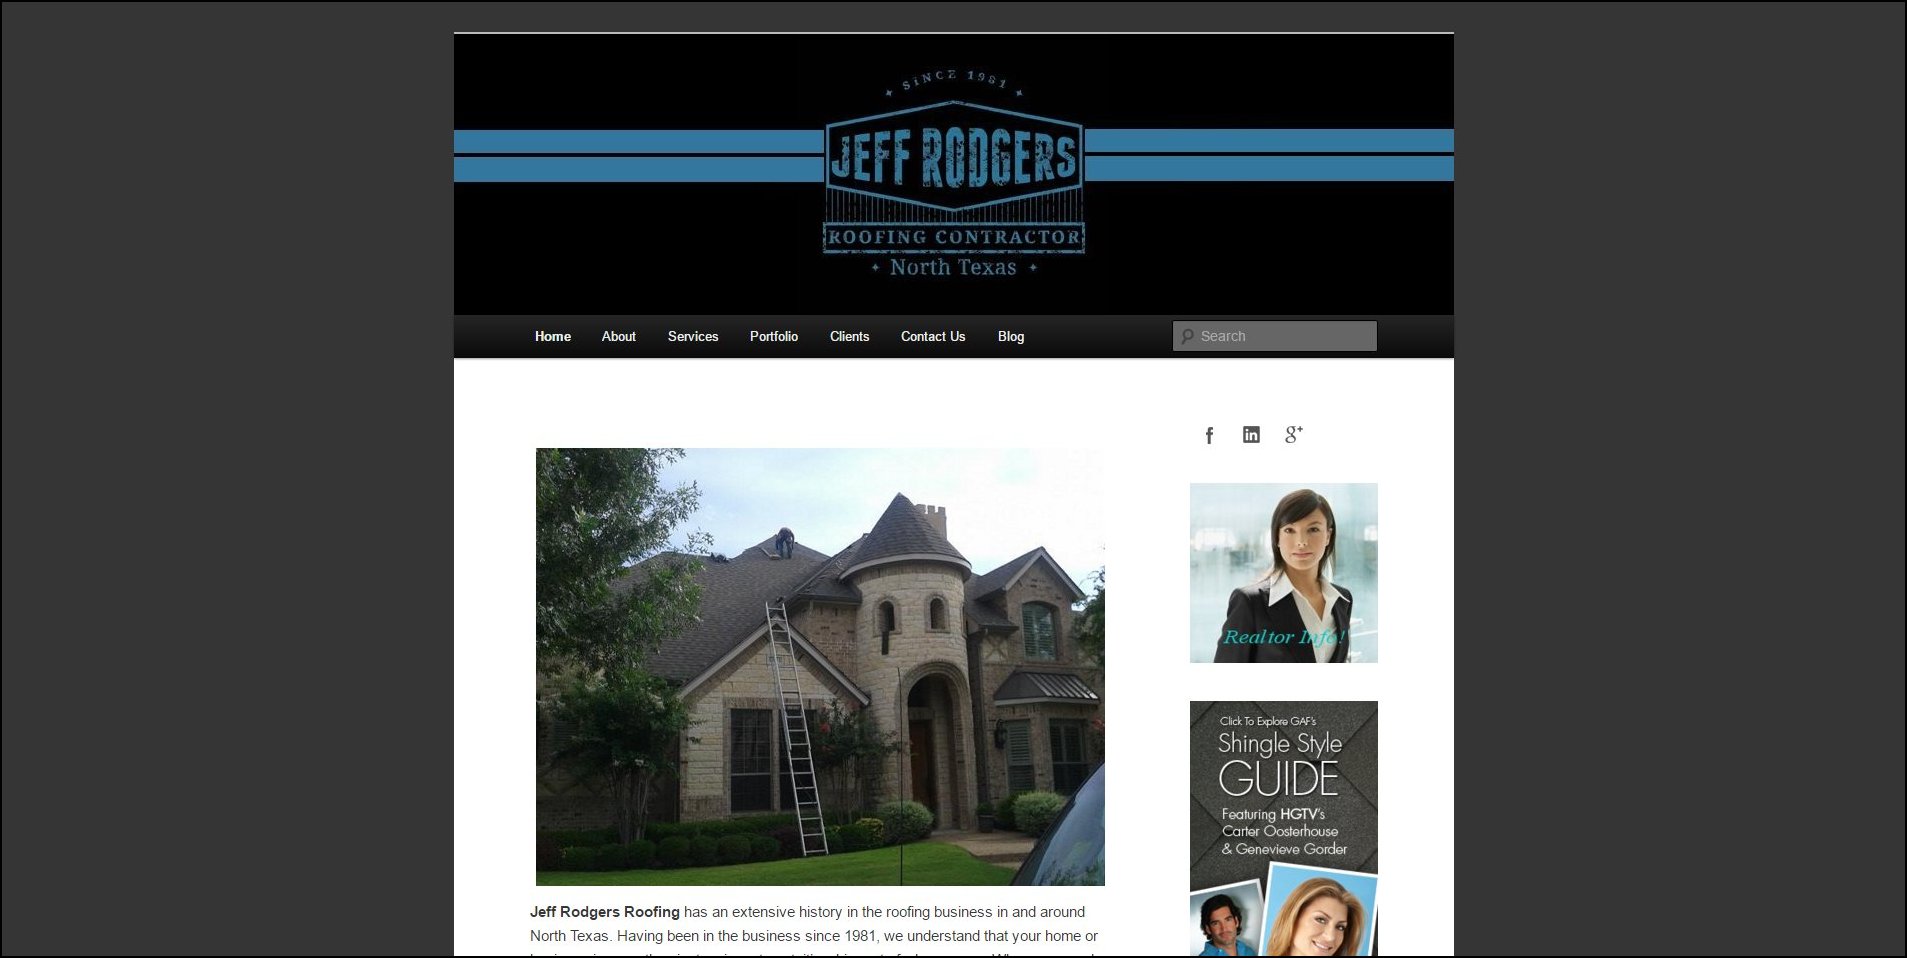 Jeff Rodgers Roofing